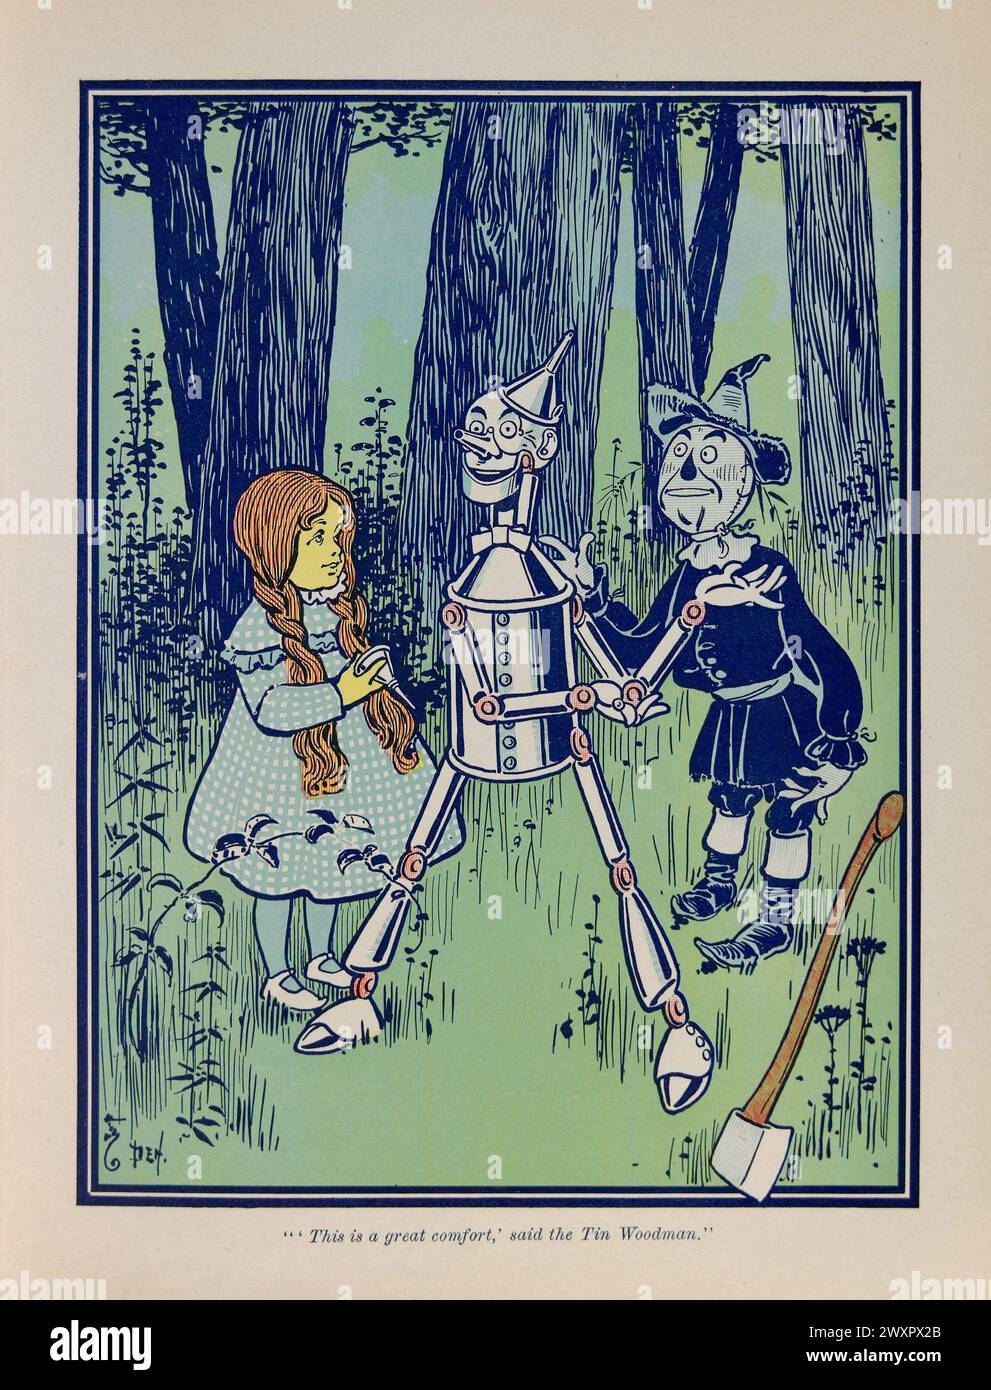 'This is a great comfort, said the Tin Woodman' with Dorothy, the tin woodman and the scarecrow. . Vintage Book illustration from The first edition  of The Wonderful Wizard of Oz by Frank Baum, 1900.  artwork by William W. Denslow Stock Photo